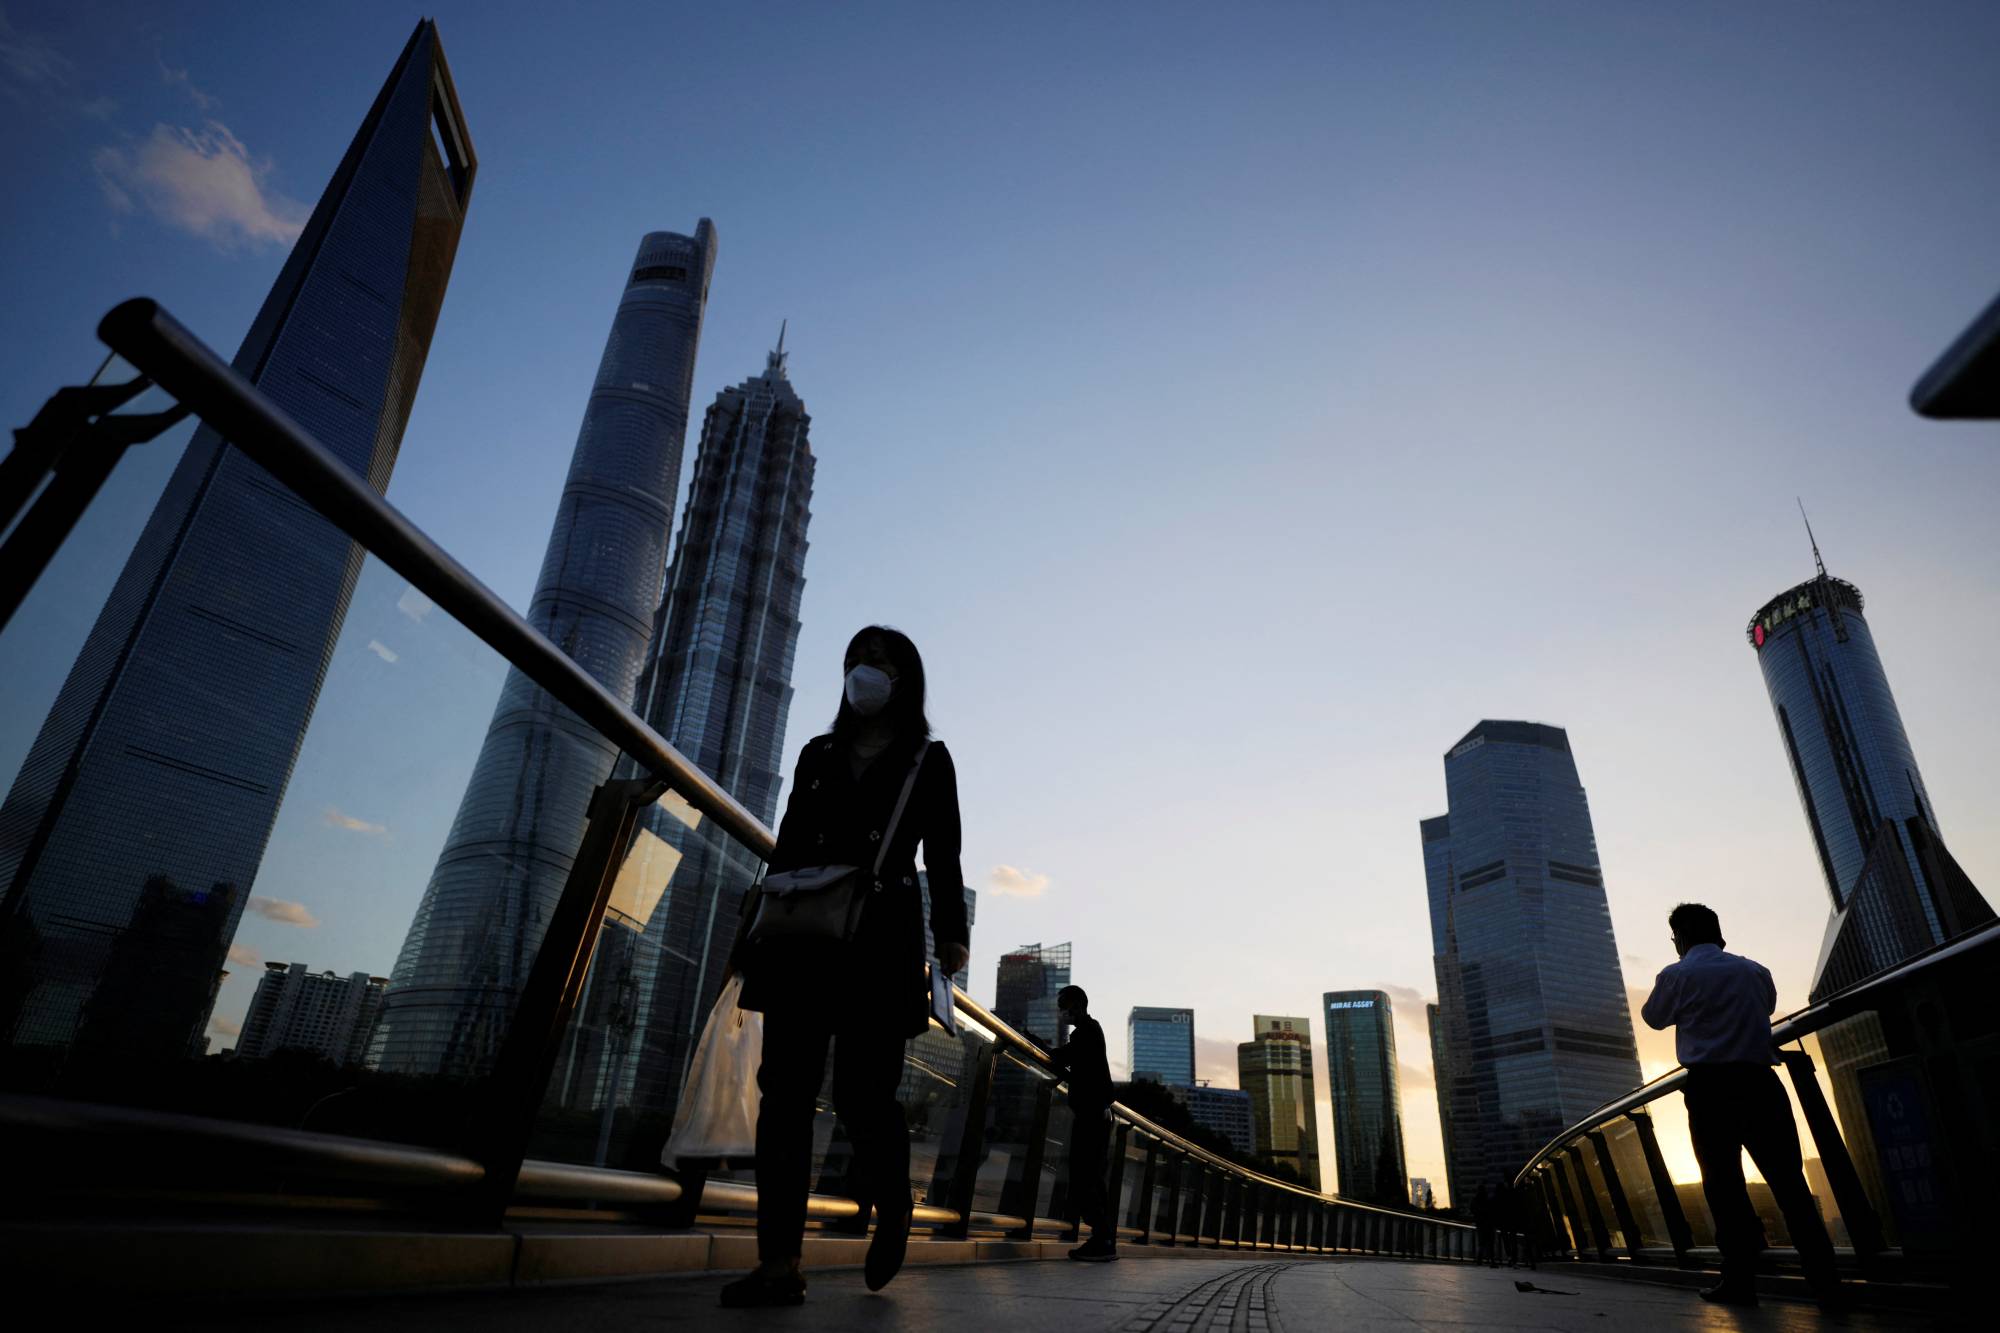 People walk on an overpass past office towers in the Lujiazui financial district of Shanghai on Monday. | REUTERS